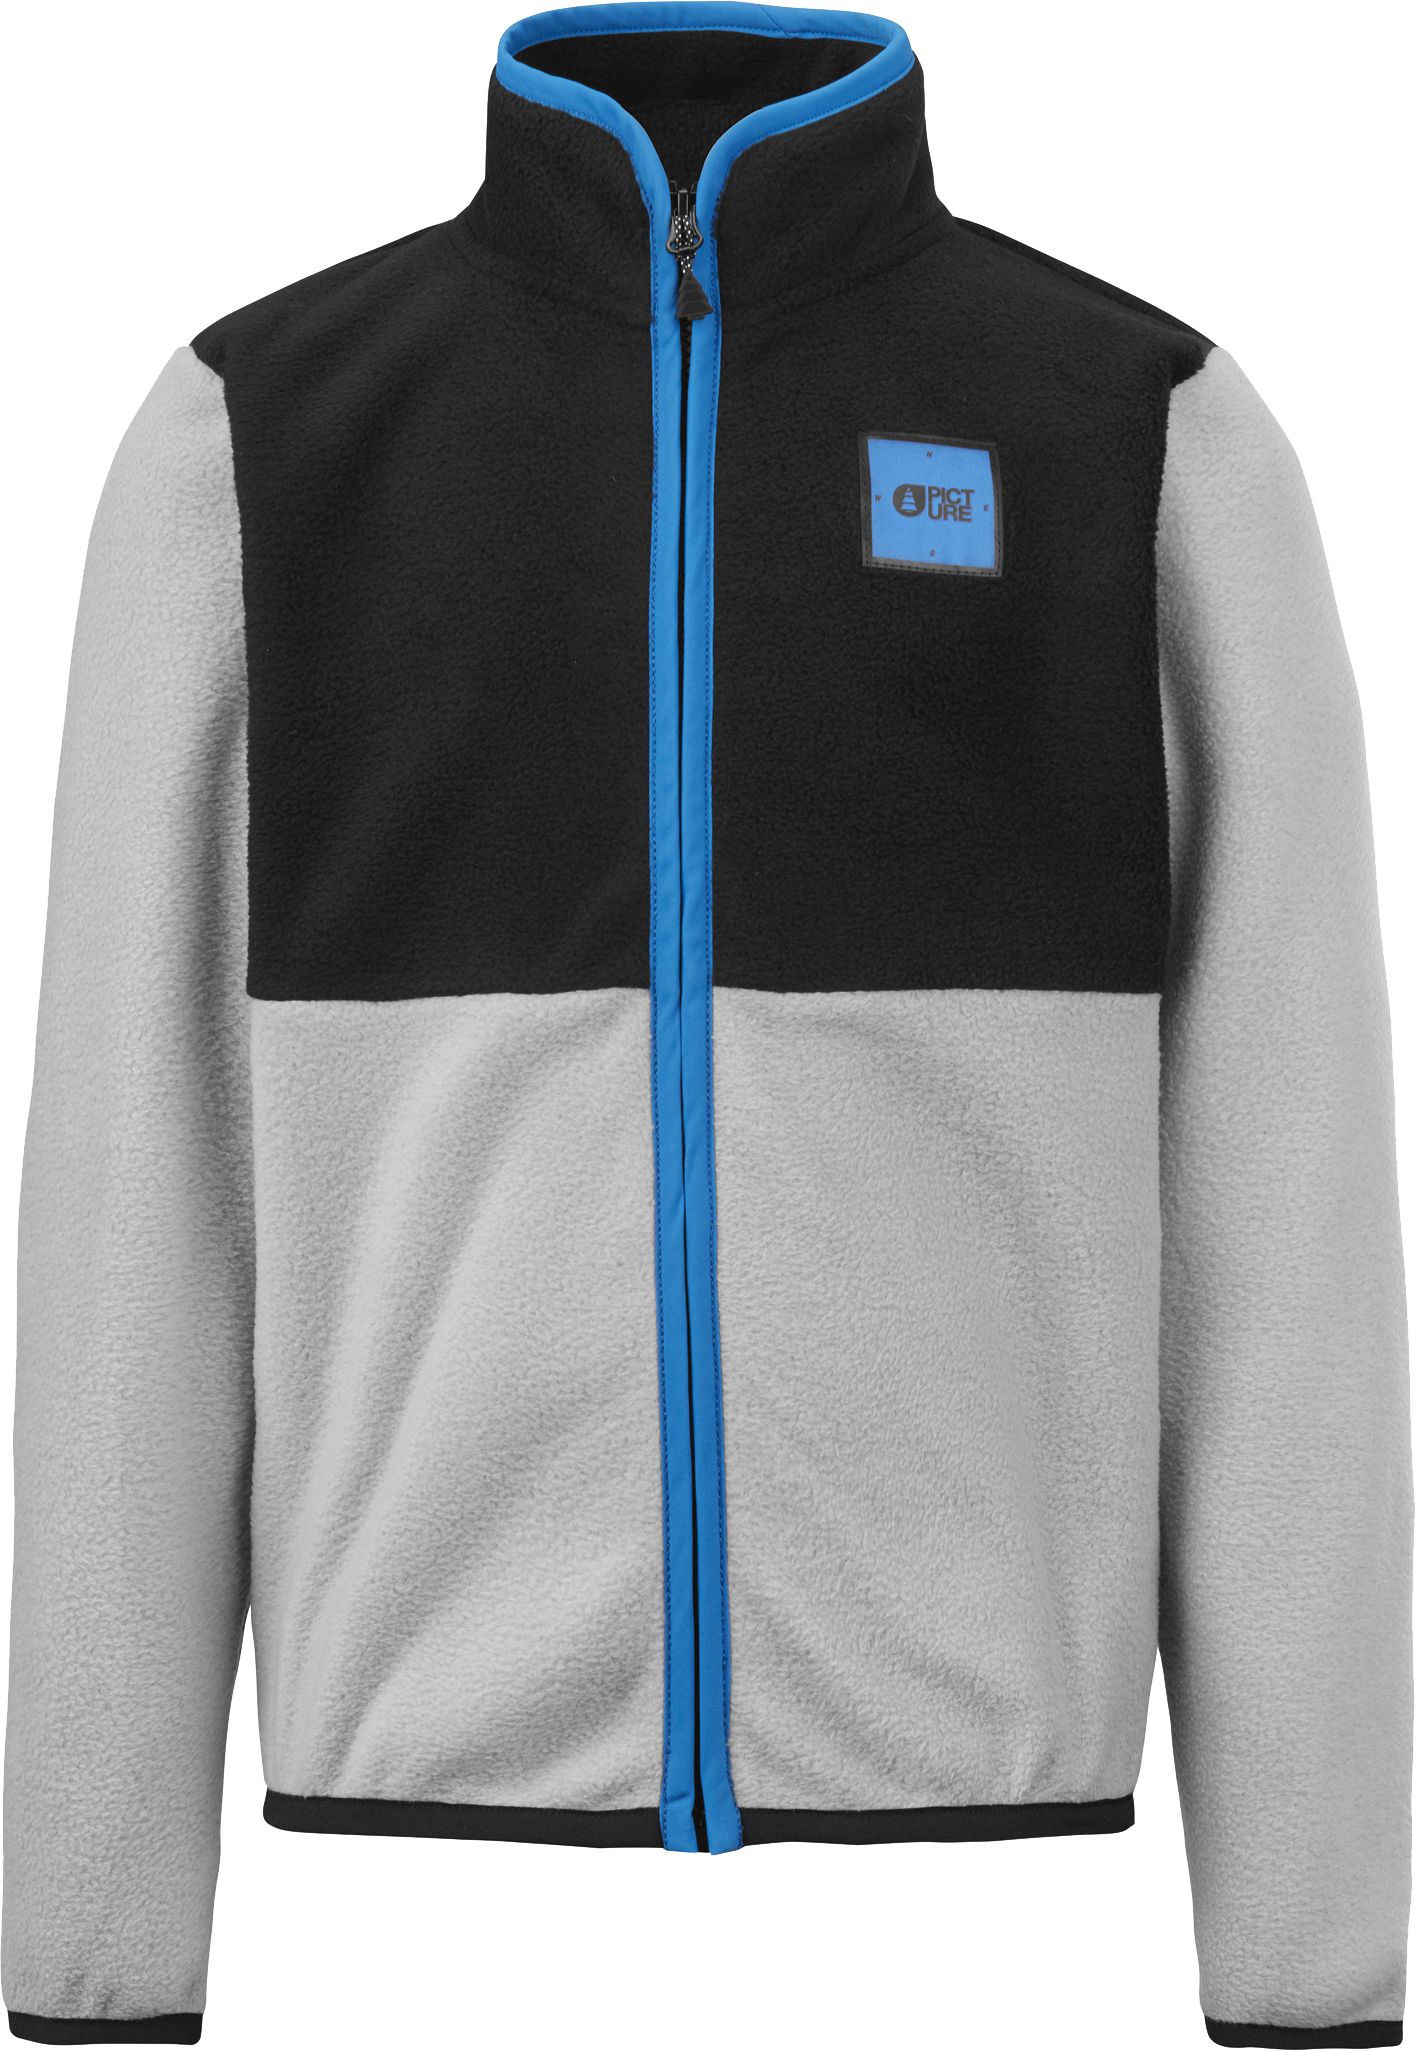 PICTURE, J PIPO YOUTH FLEECE